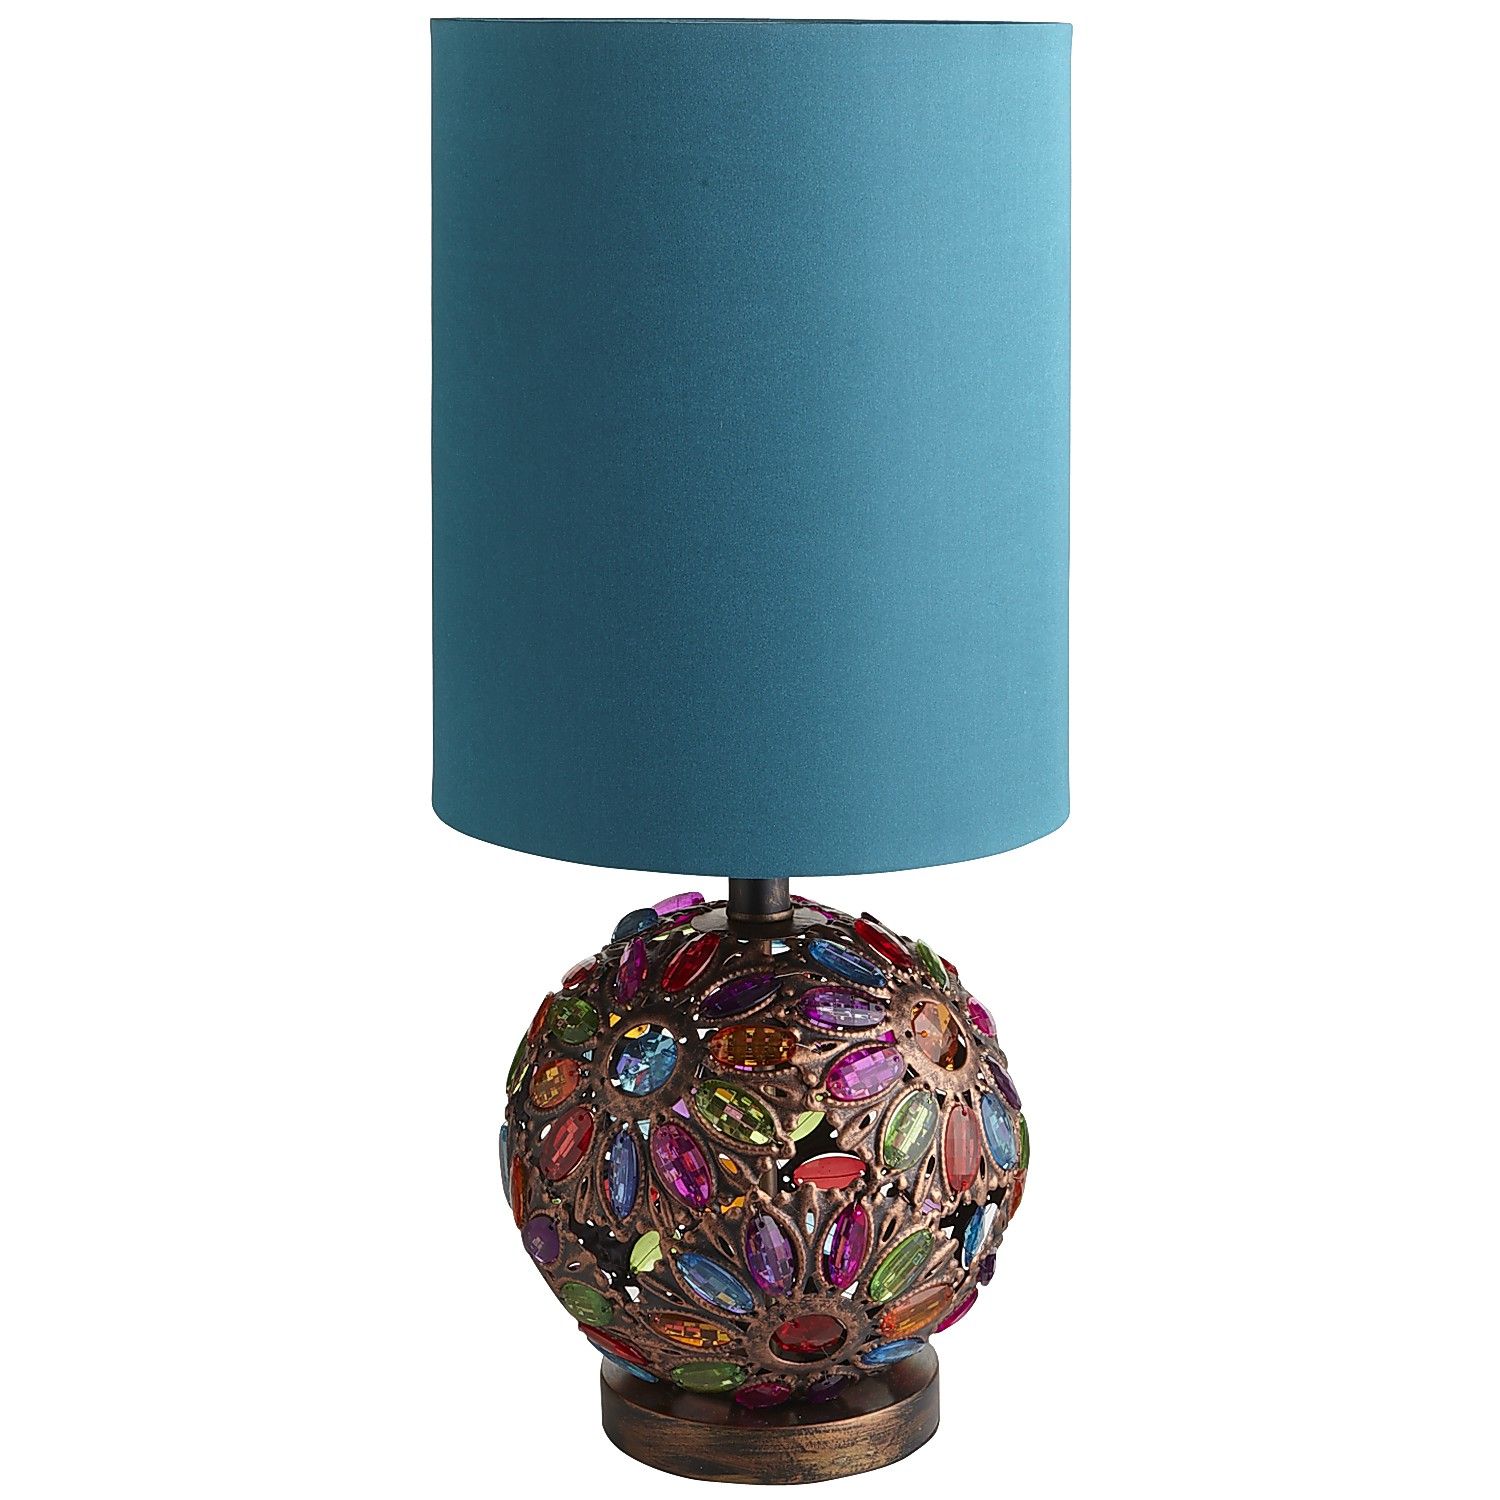 Gemstone Accent Lamp from Pier 1